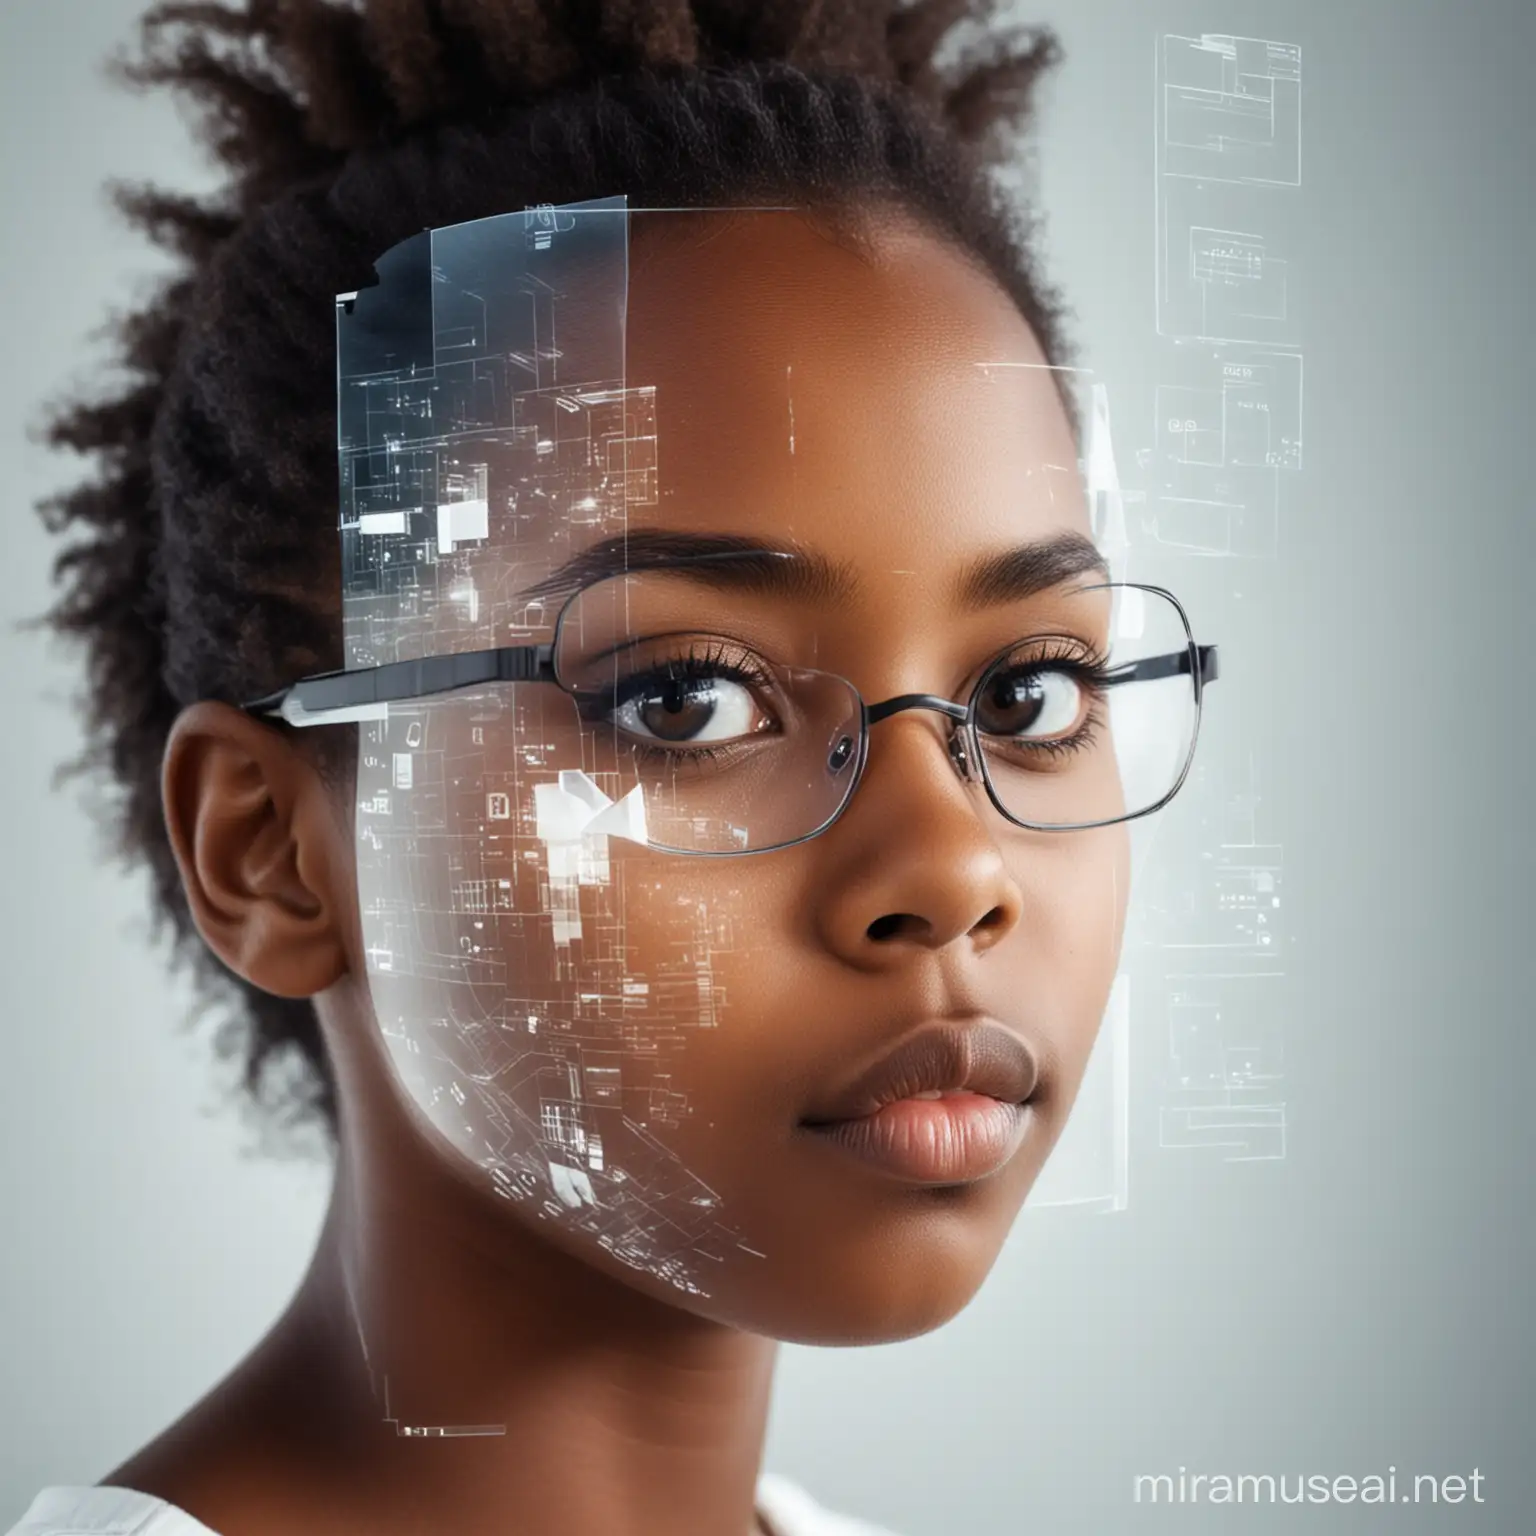 double exposure effect, of the face of a black young girl, with ICT images on her face, she is facing sideways, wearing a spectacle